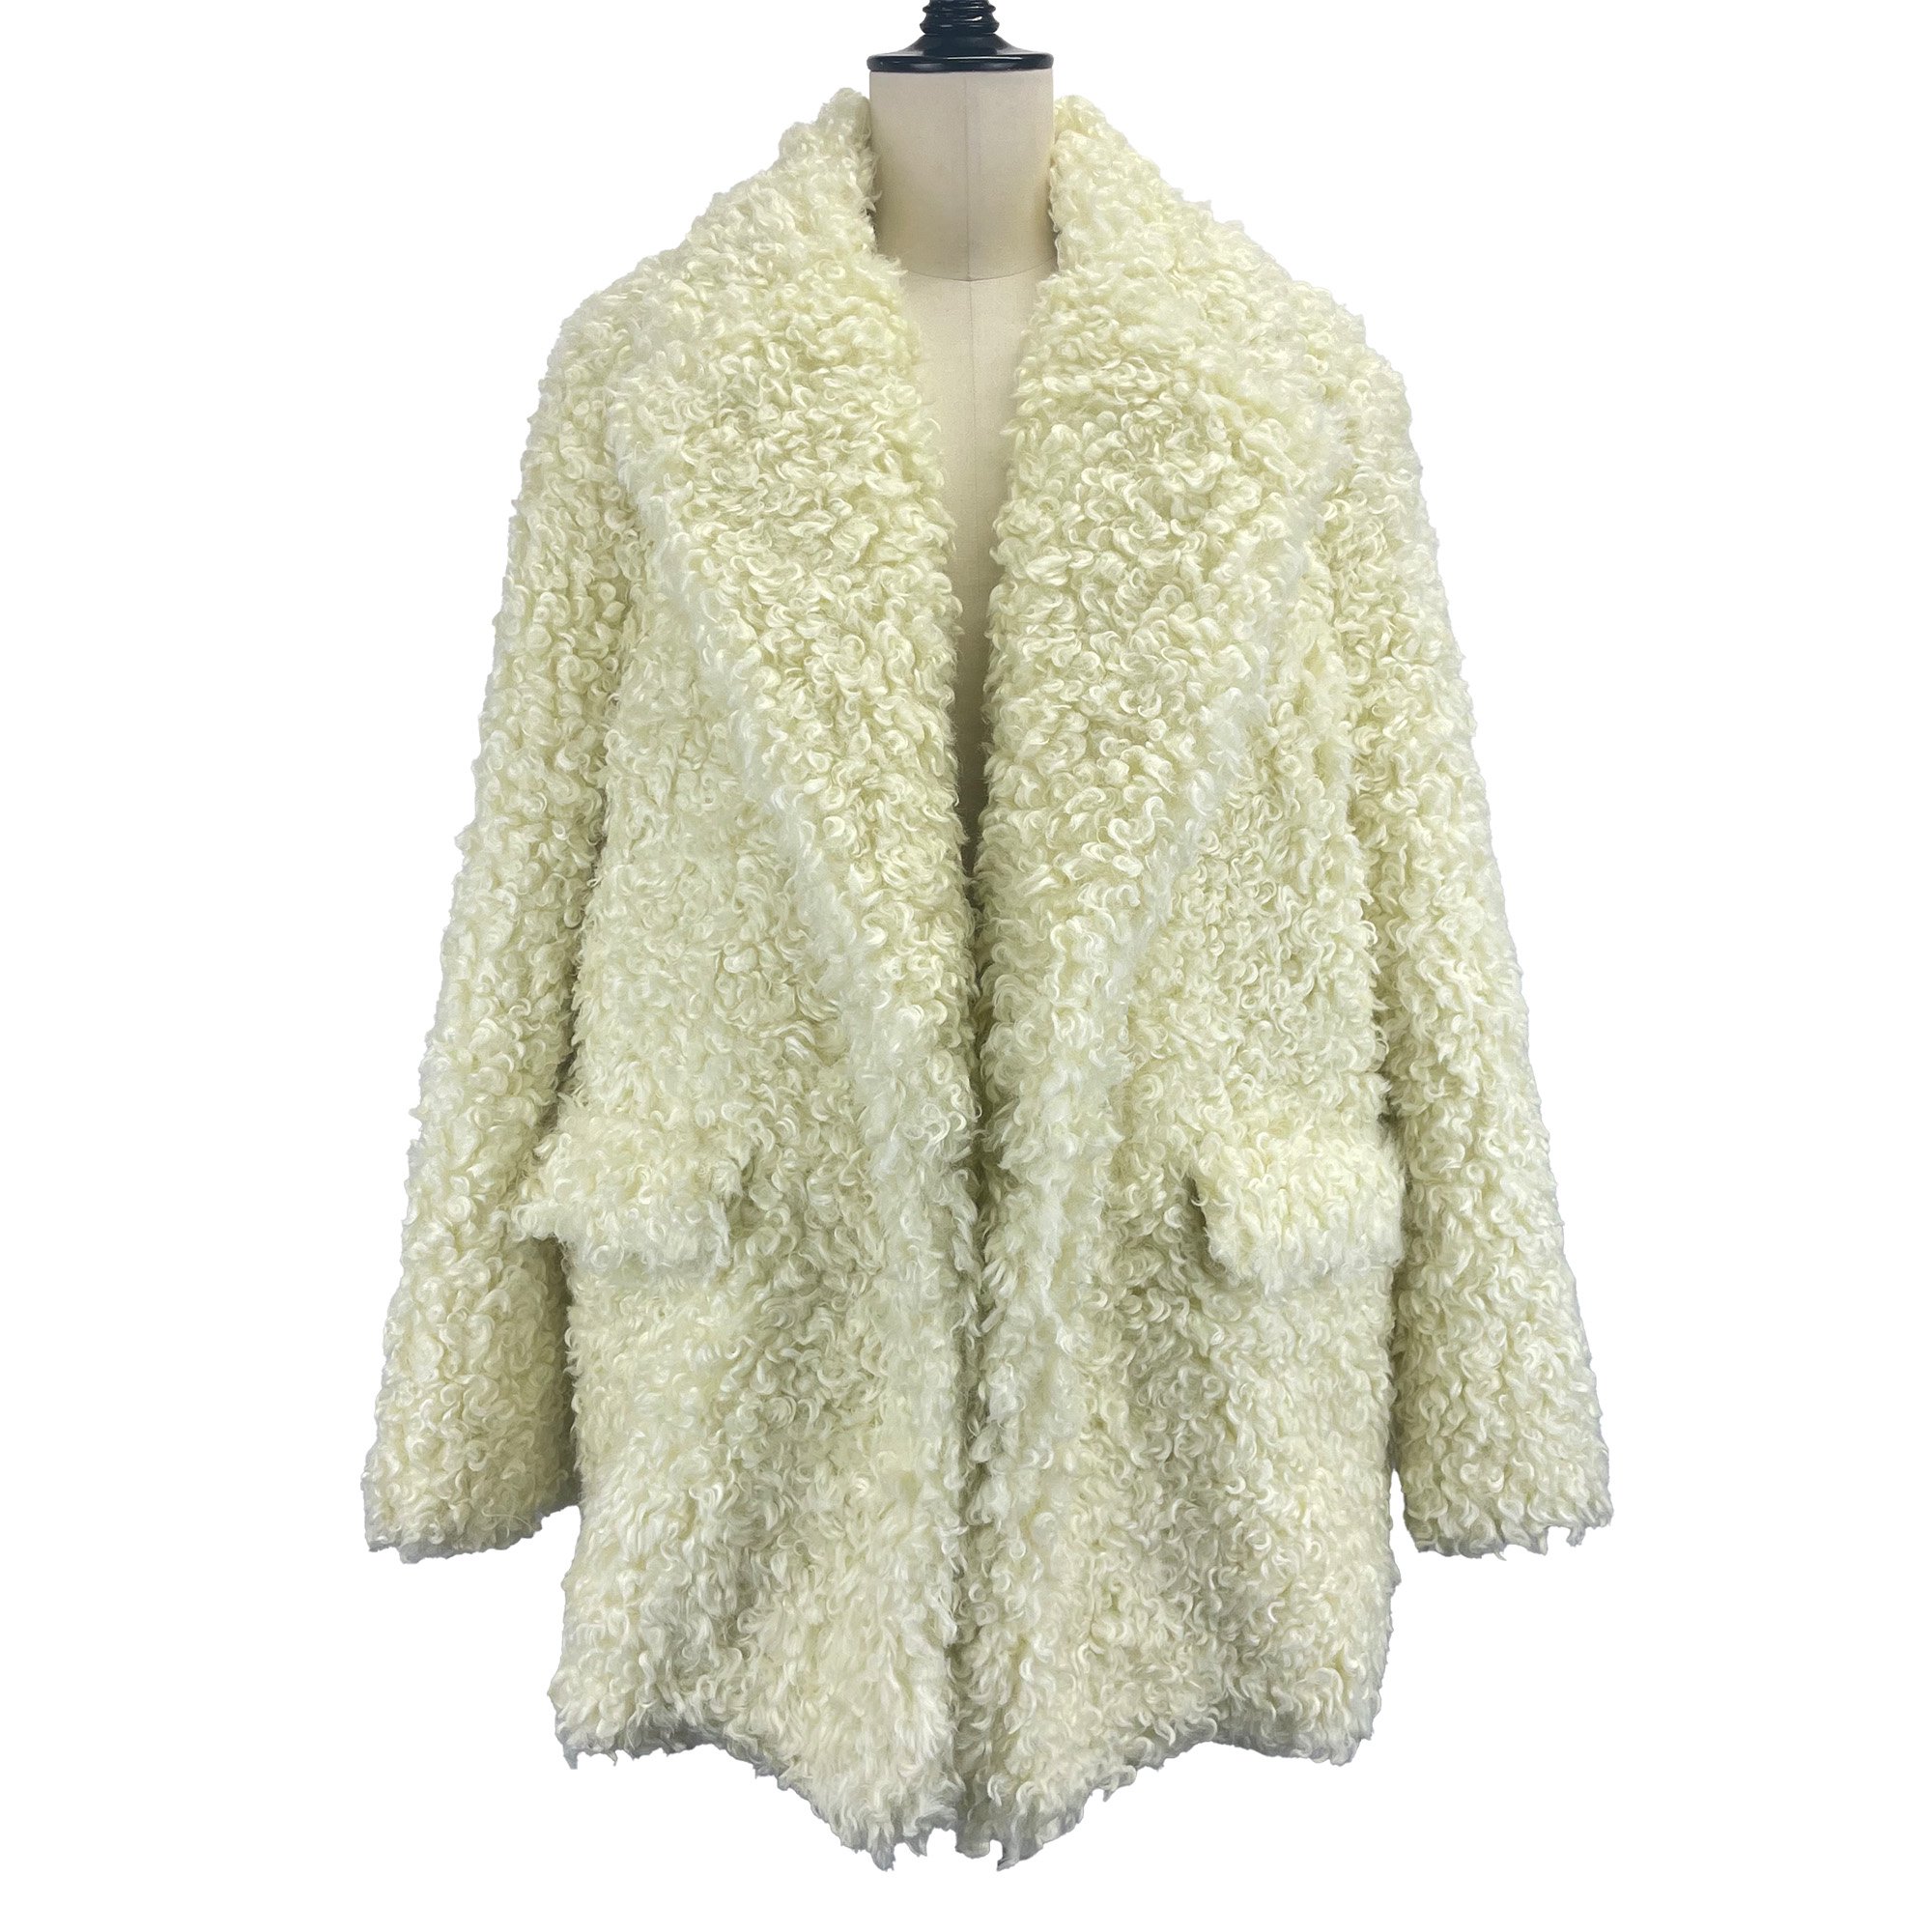 <img class='new_mark_img1' src='https://img.shop-pro.jp/img/new/icons7.gif' style='border:none;display:inline;margin:0px;padding:0px;width:auto;' />ISABELLE BLANCHE BOA COAT